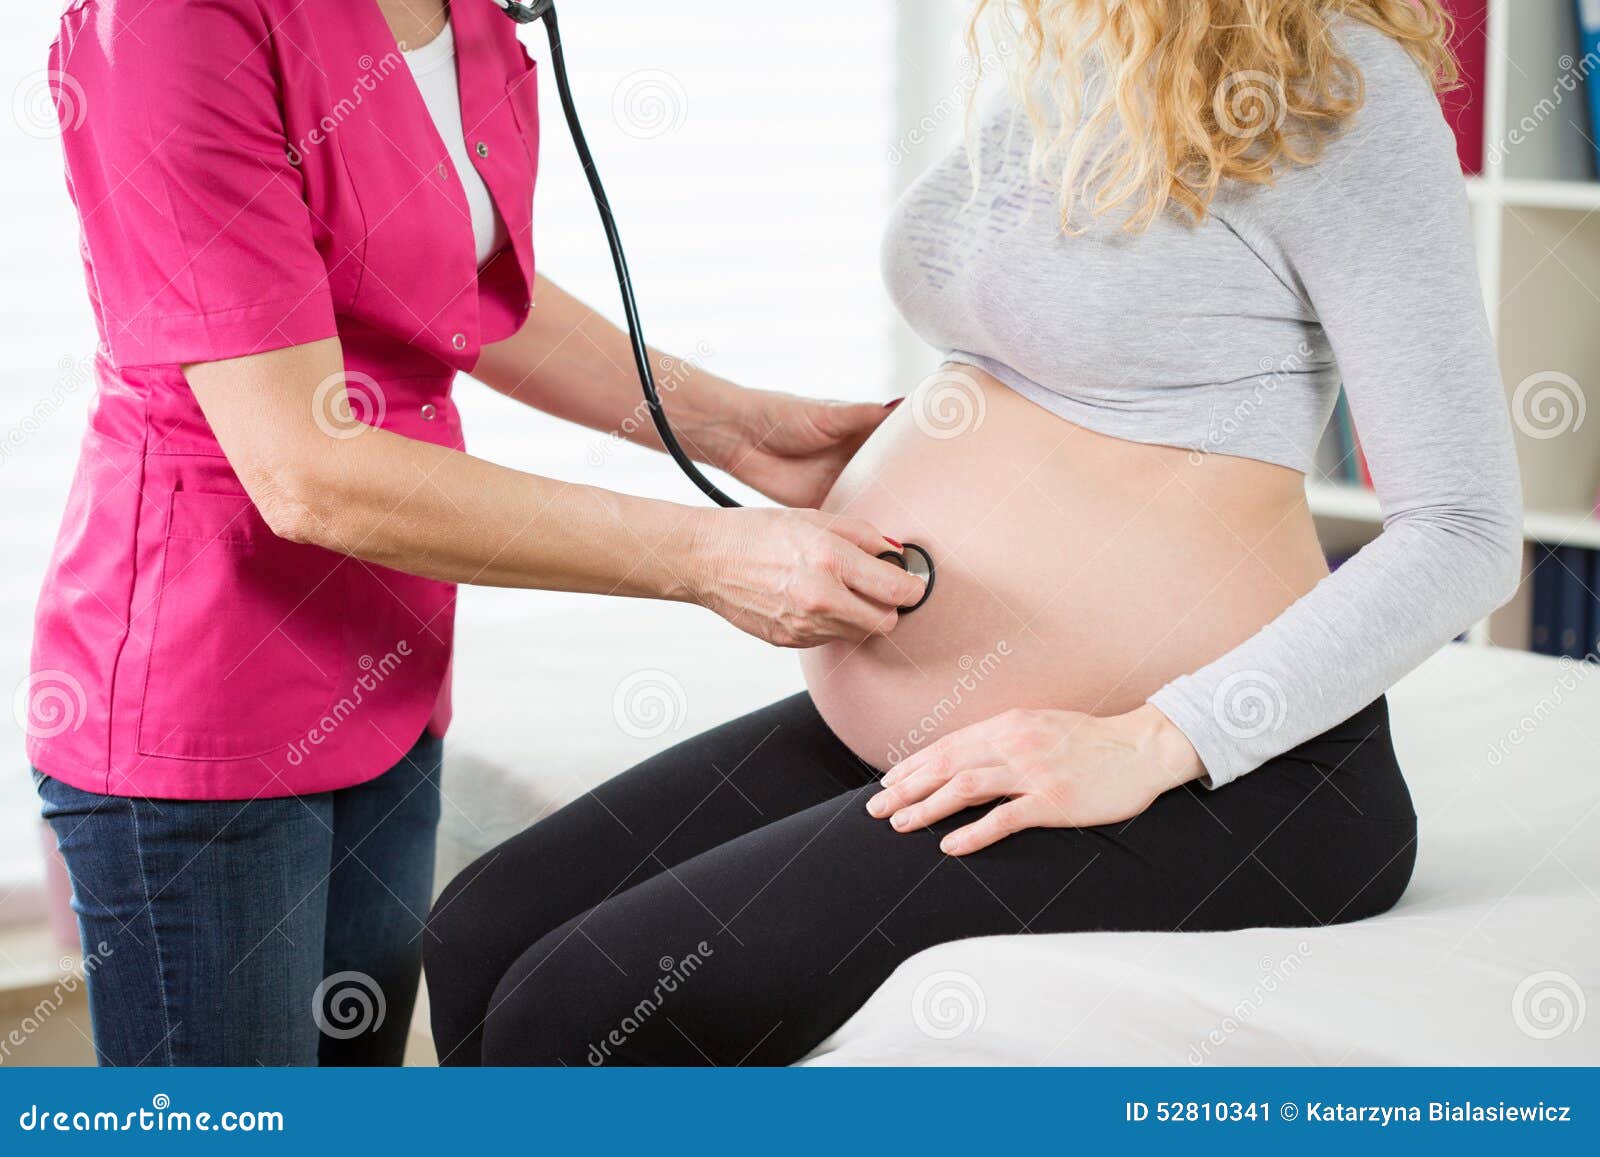 Examination During Pregnancy With Stethoscope Stock Image Image Of Belly Motherhood 52810341 